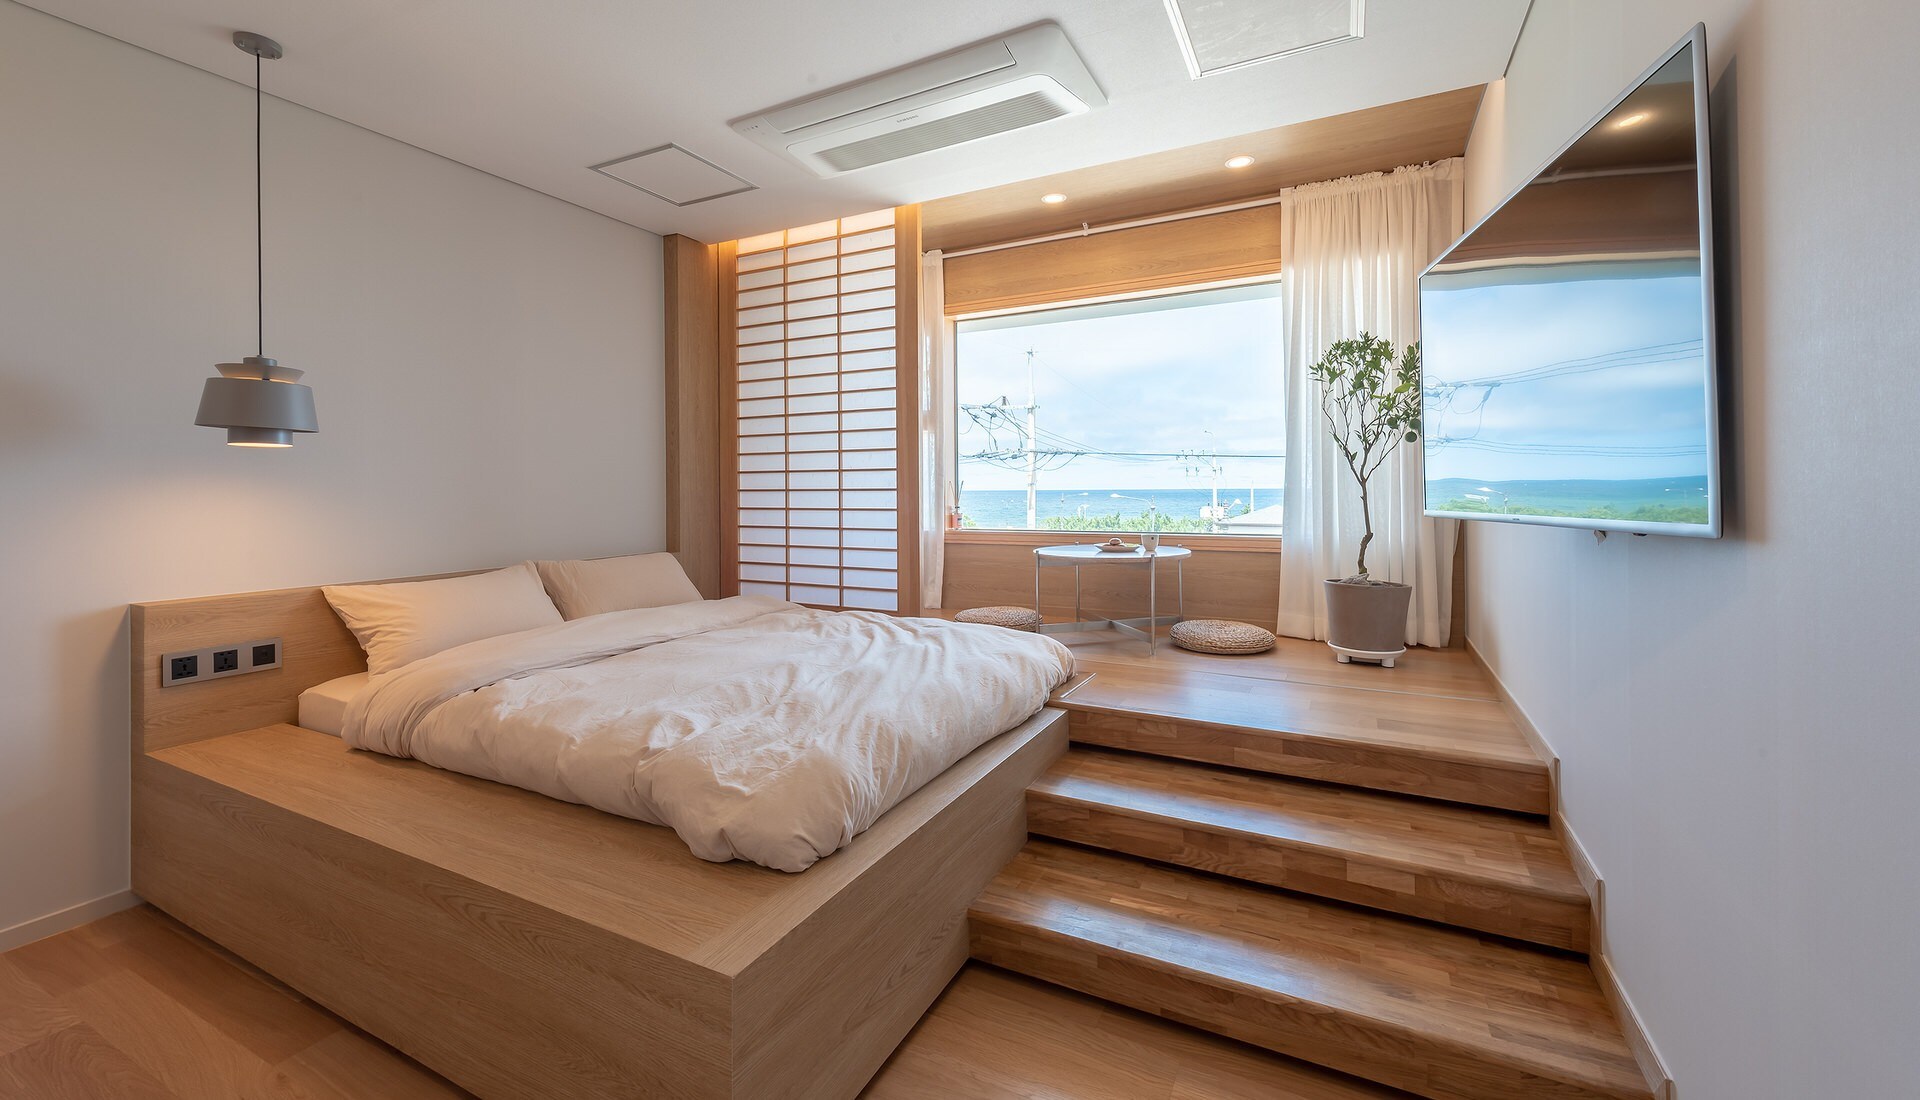 Property Image 1 - cozy modern apartment with ocean view 202